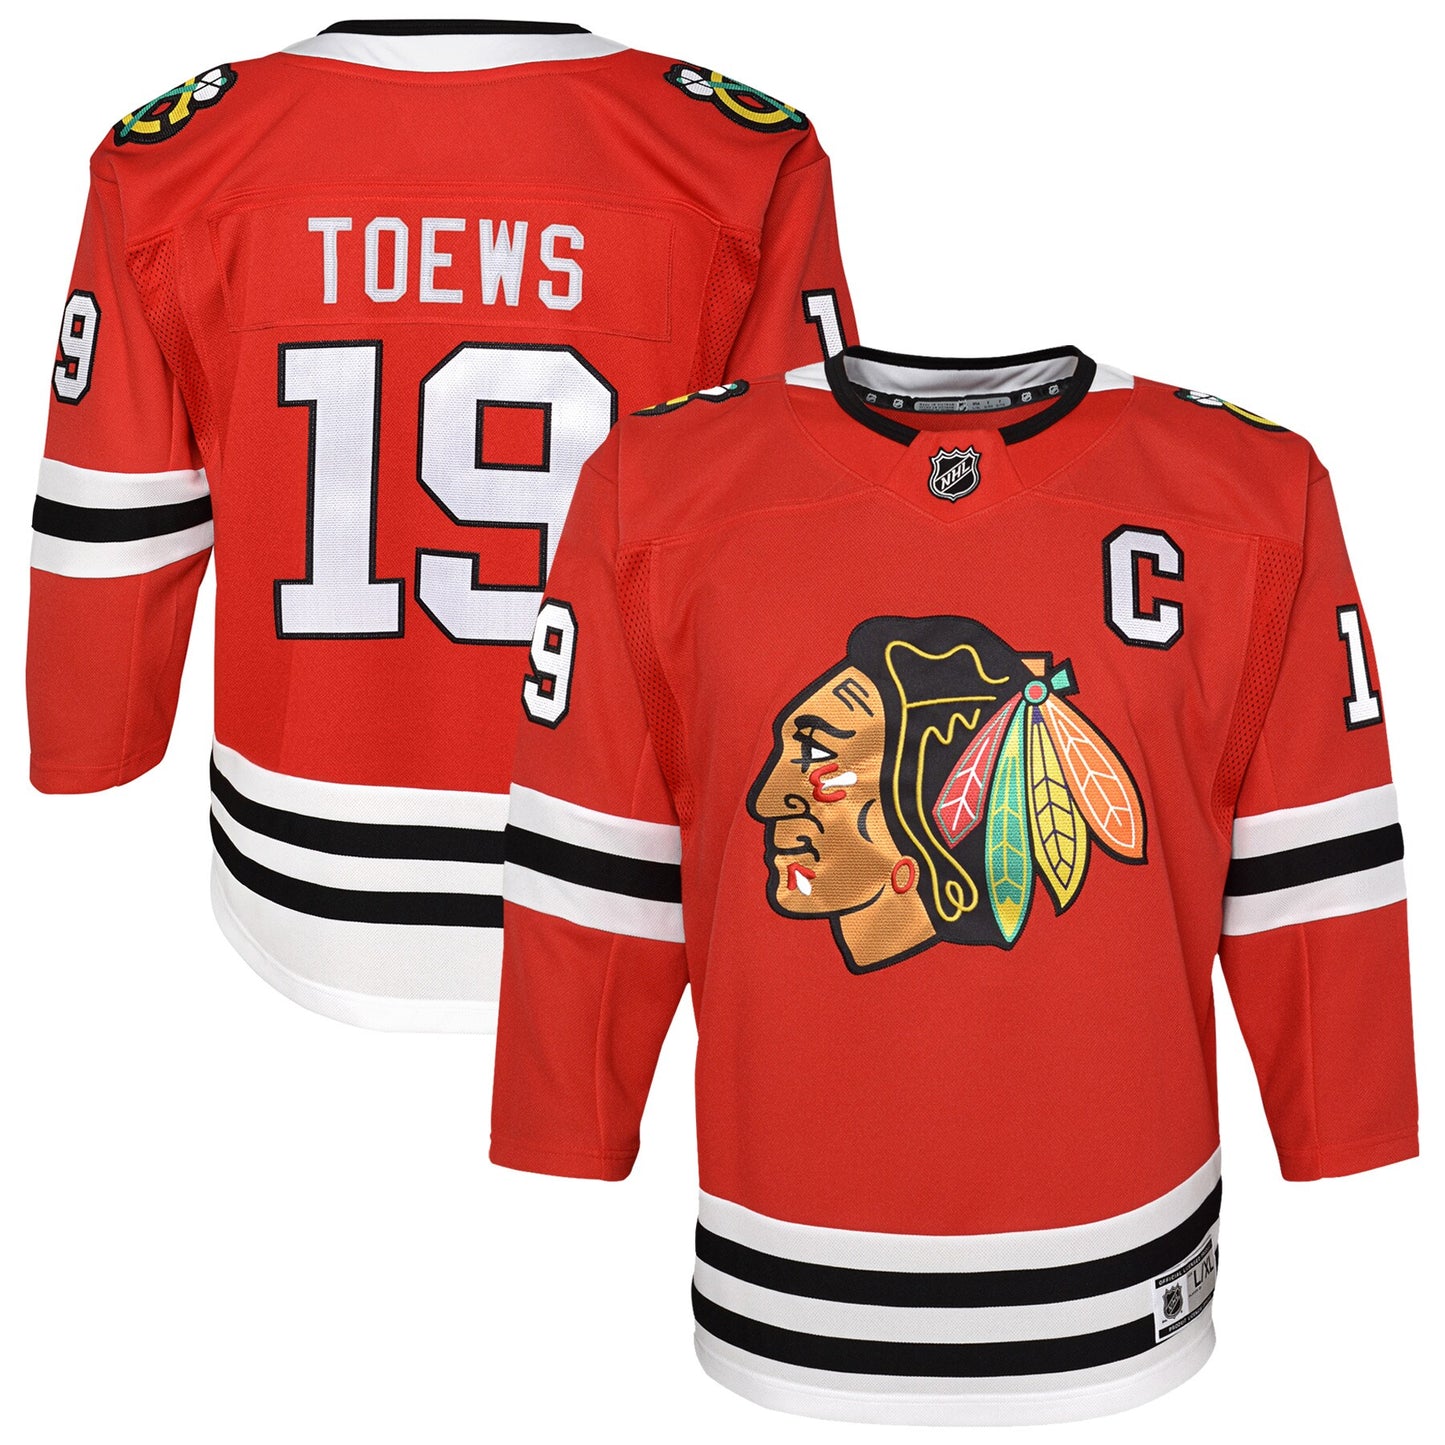 Jonathan Toews Chicago Blackhawks Youth Home Premier Player Jersey - Red